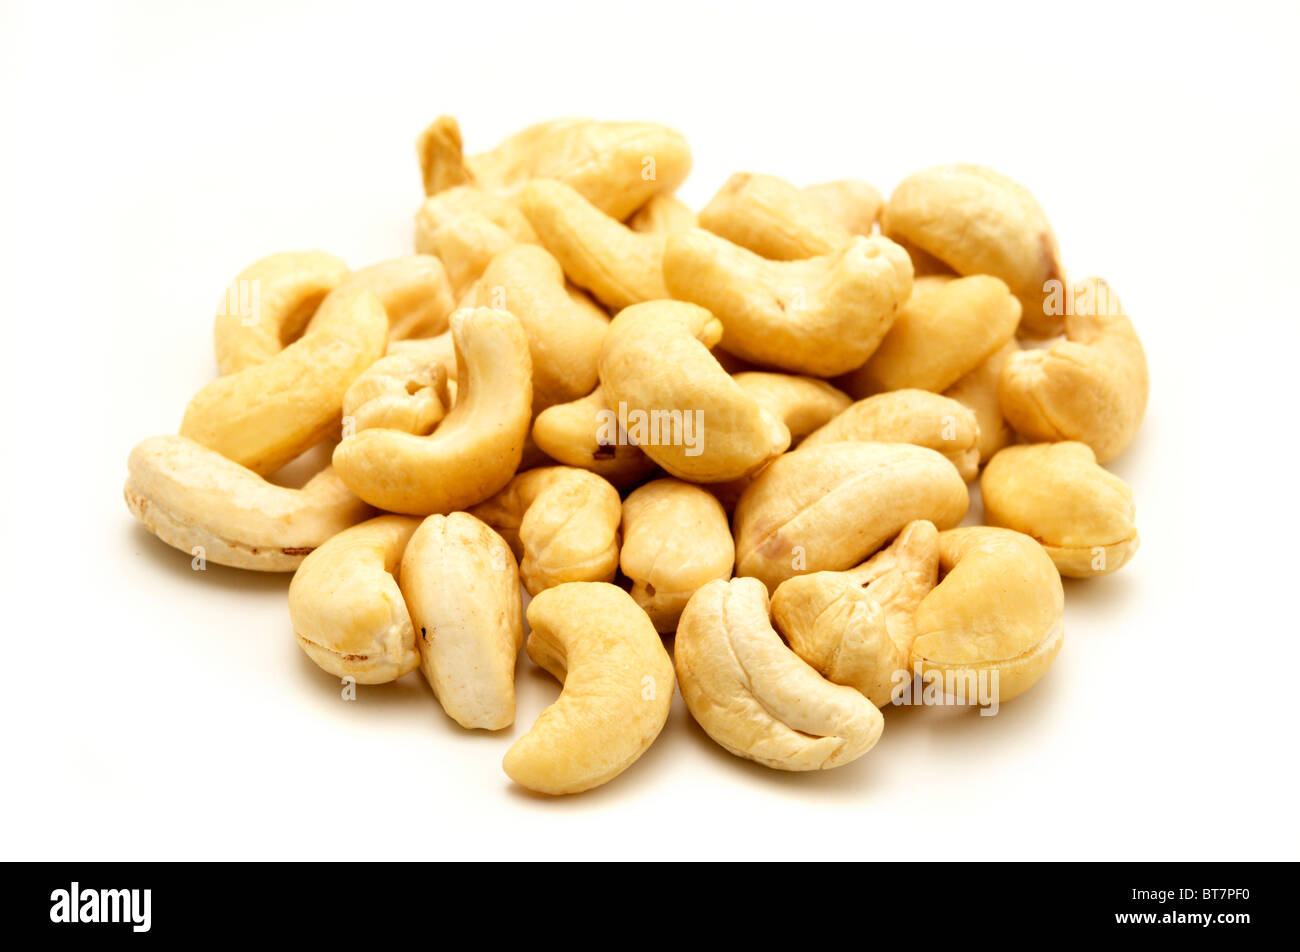 Cashew nuts on a white background Stock Photo